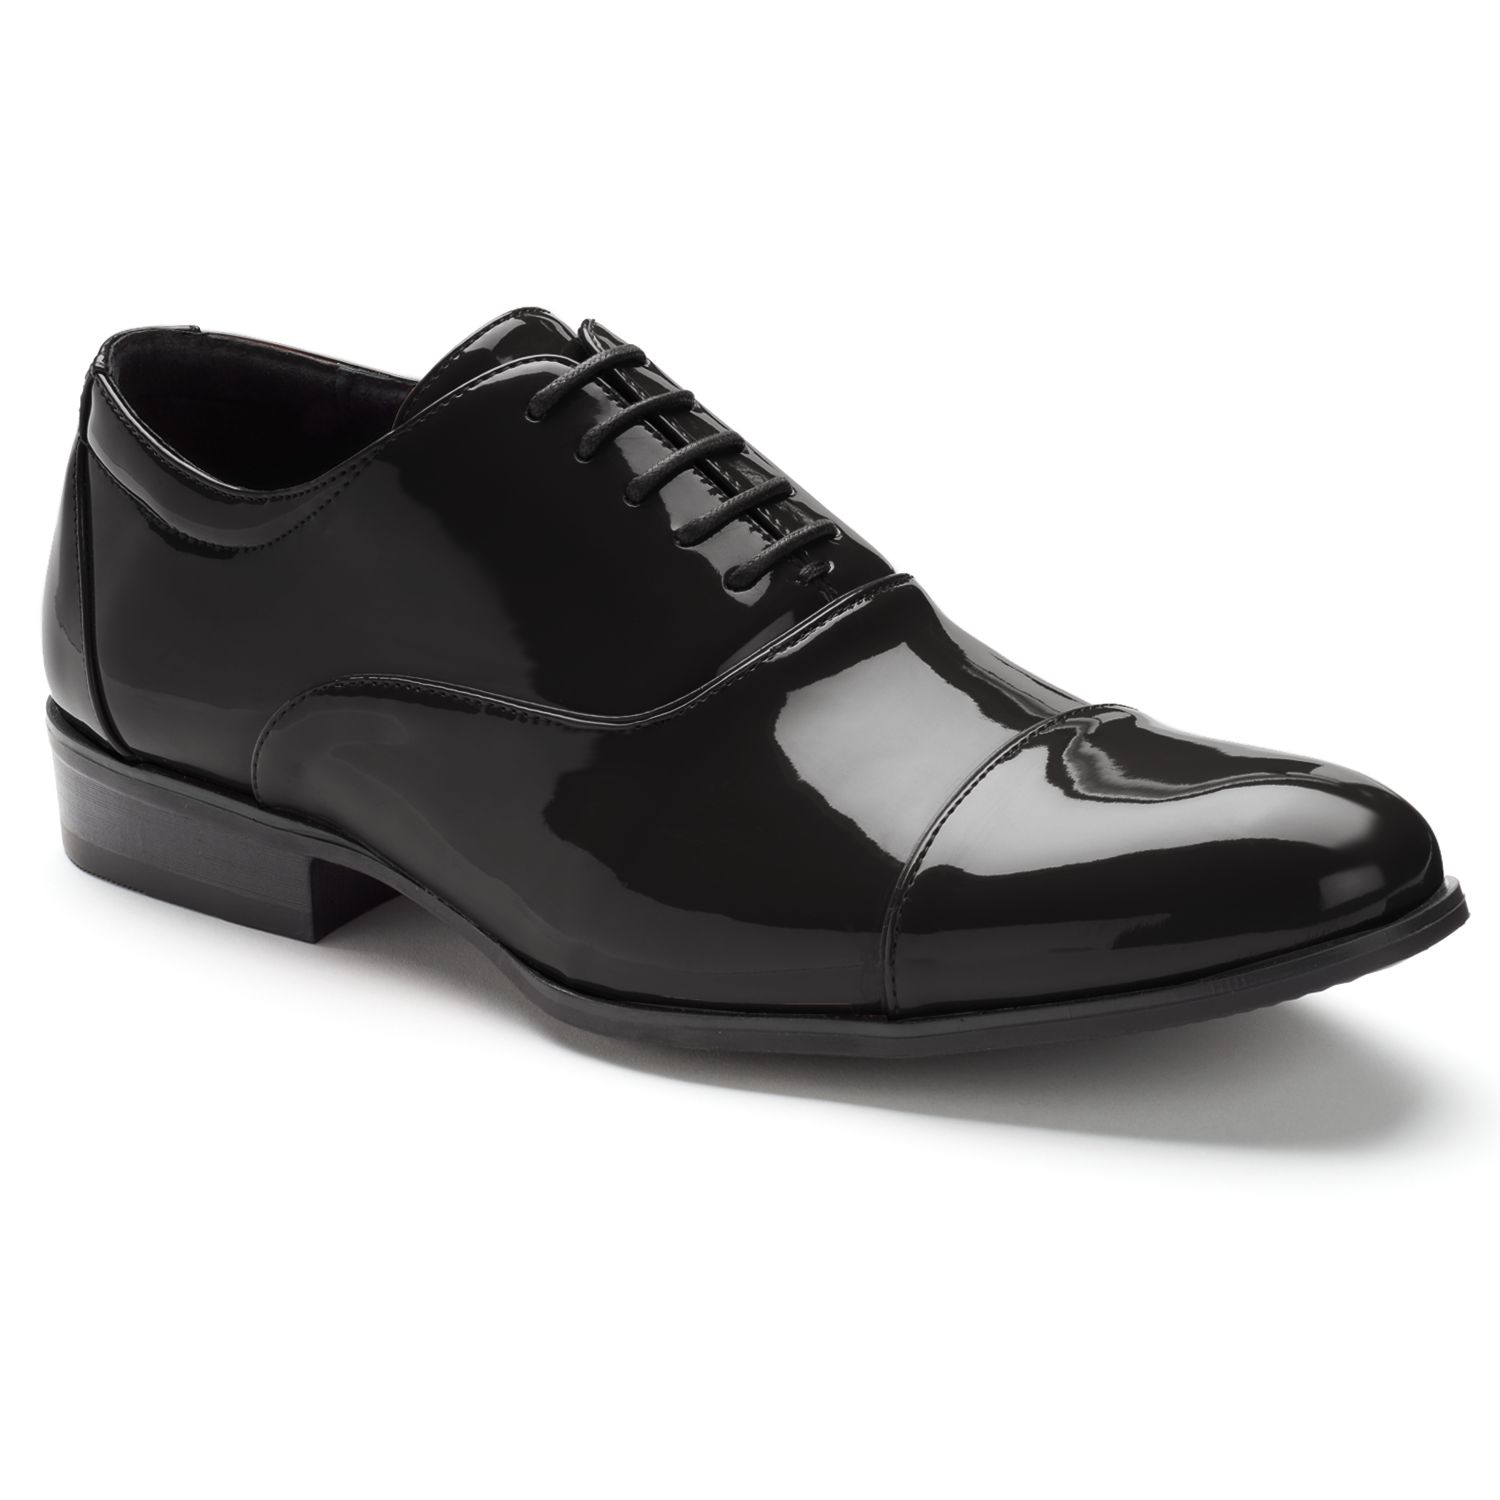 stacy adams patent leather shoes